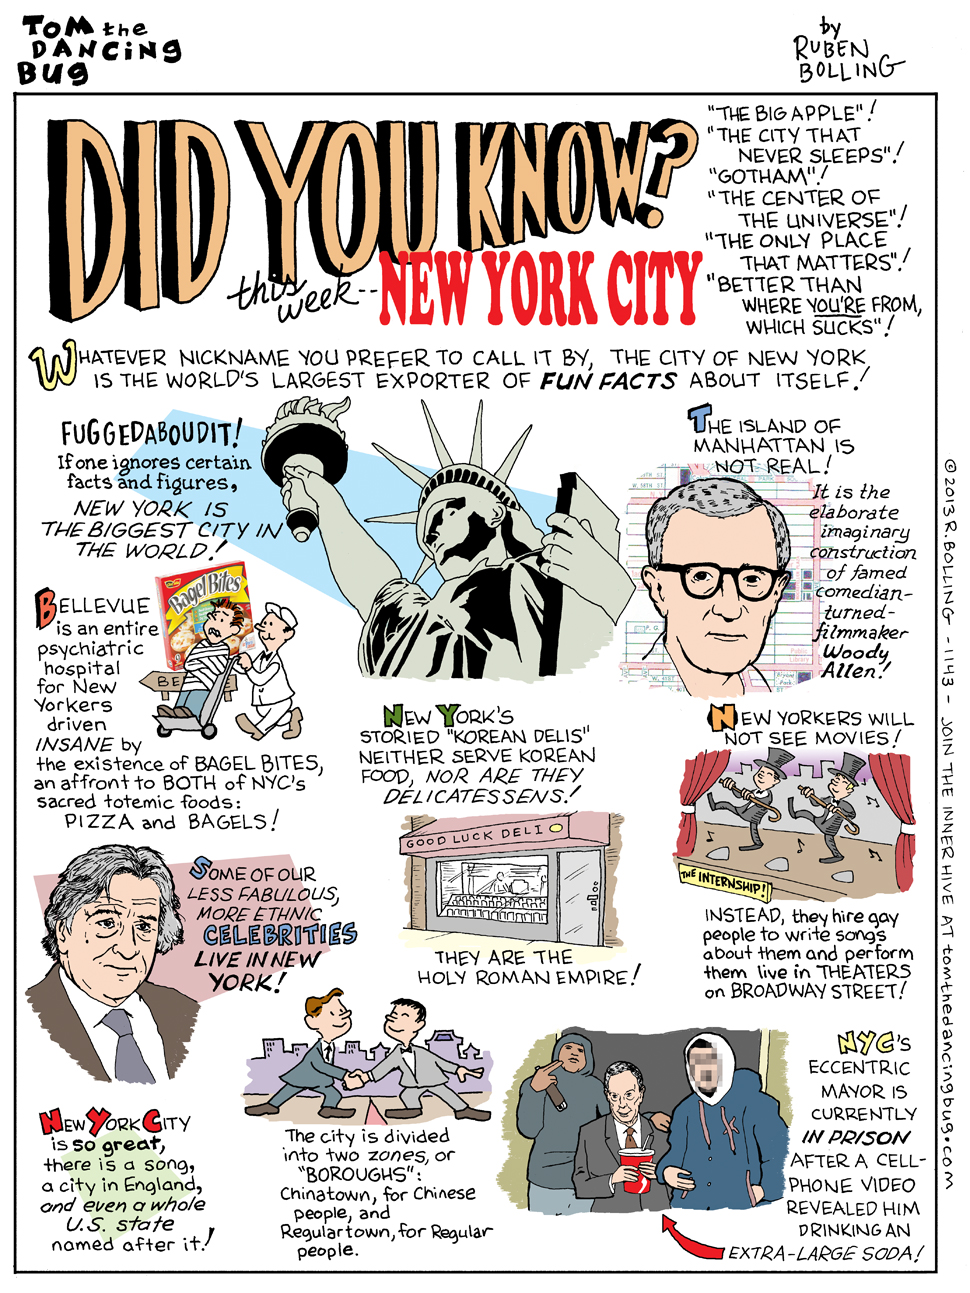 TOM THE DANCING BUG: Did You Know - Fun Facts About NYC! / Boing Boing